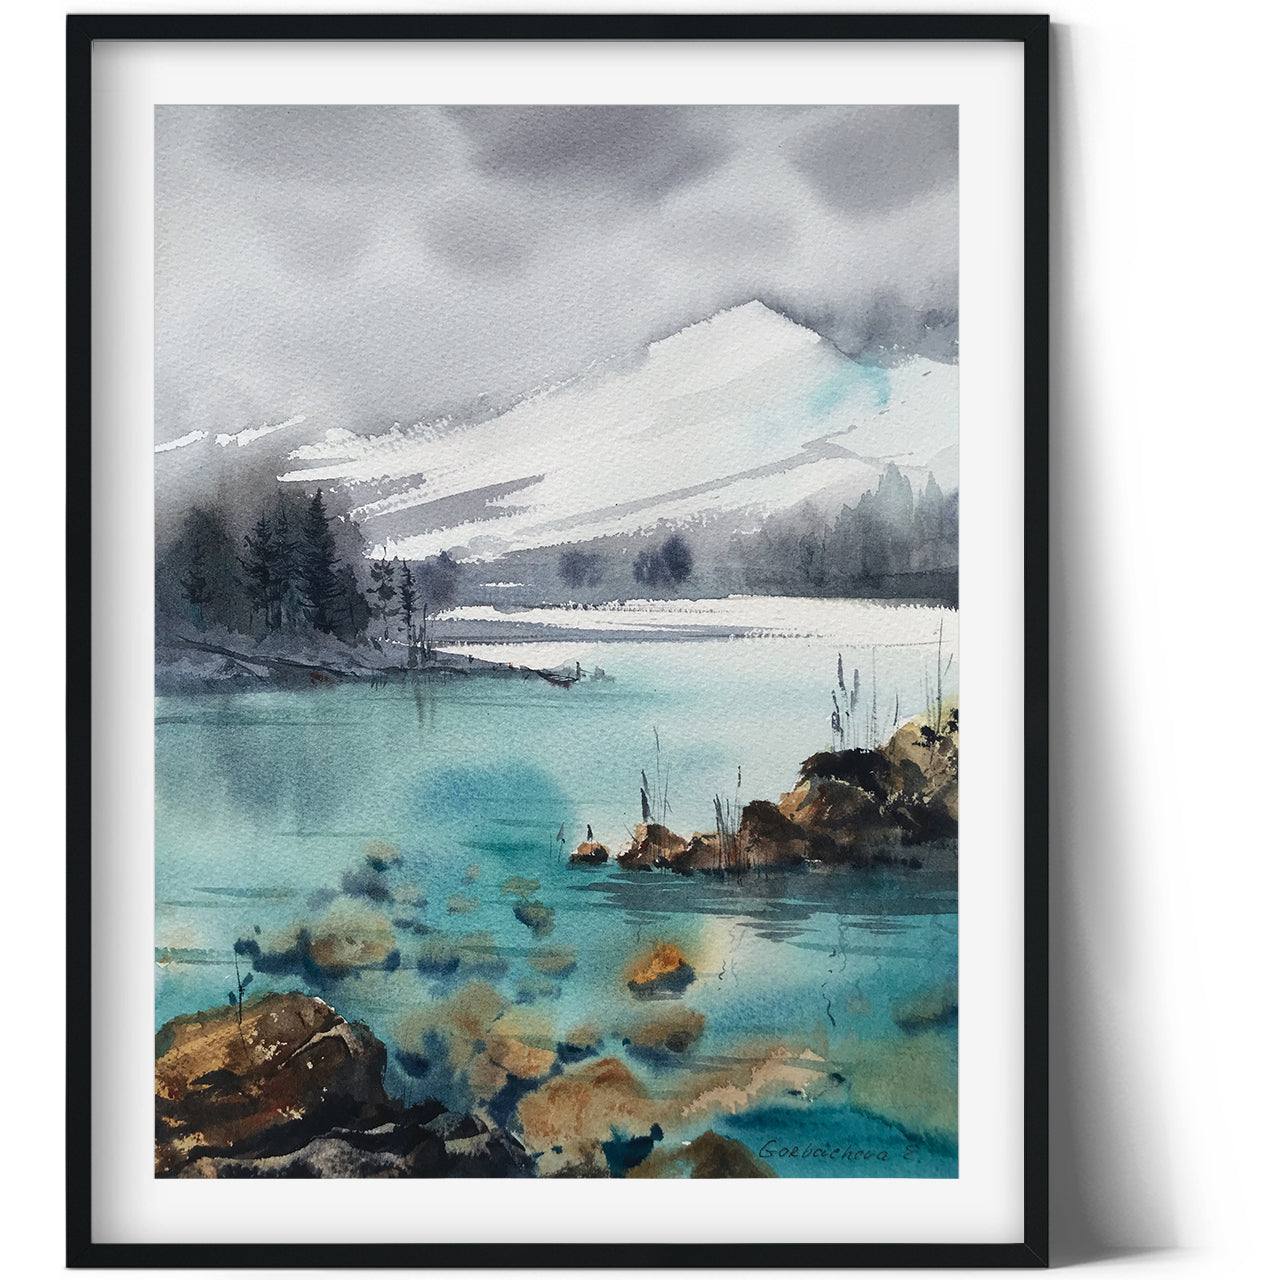 Abstract Watercolor Mountain Painting Original, Landscape Artwork, Mountains With Turquoise Lake, Nature Wall Decor